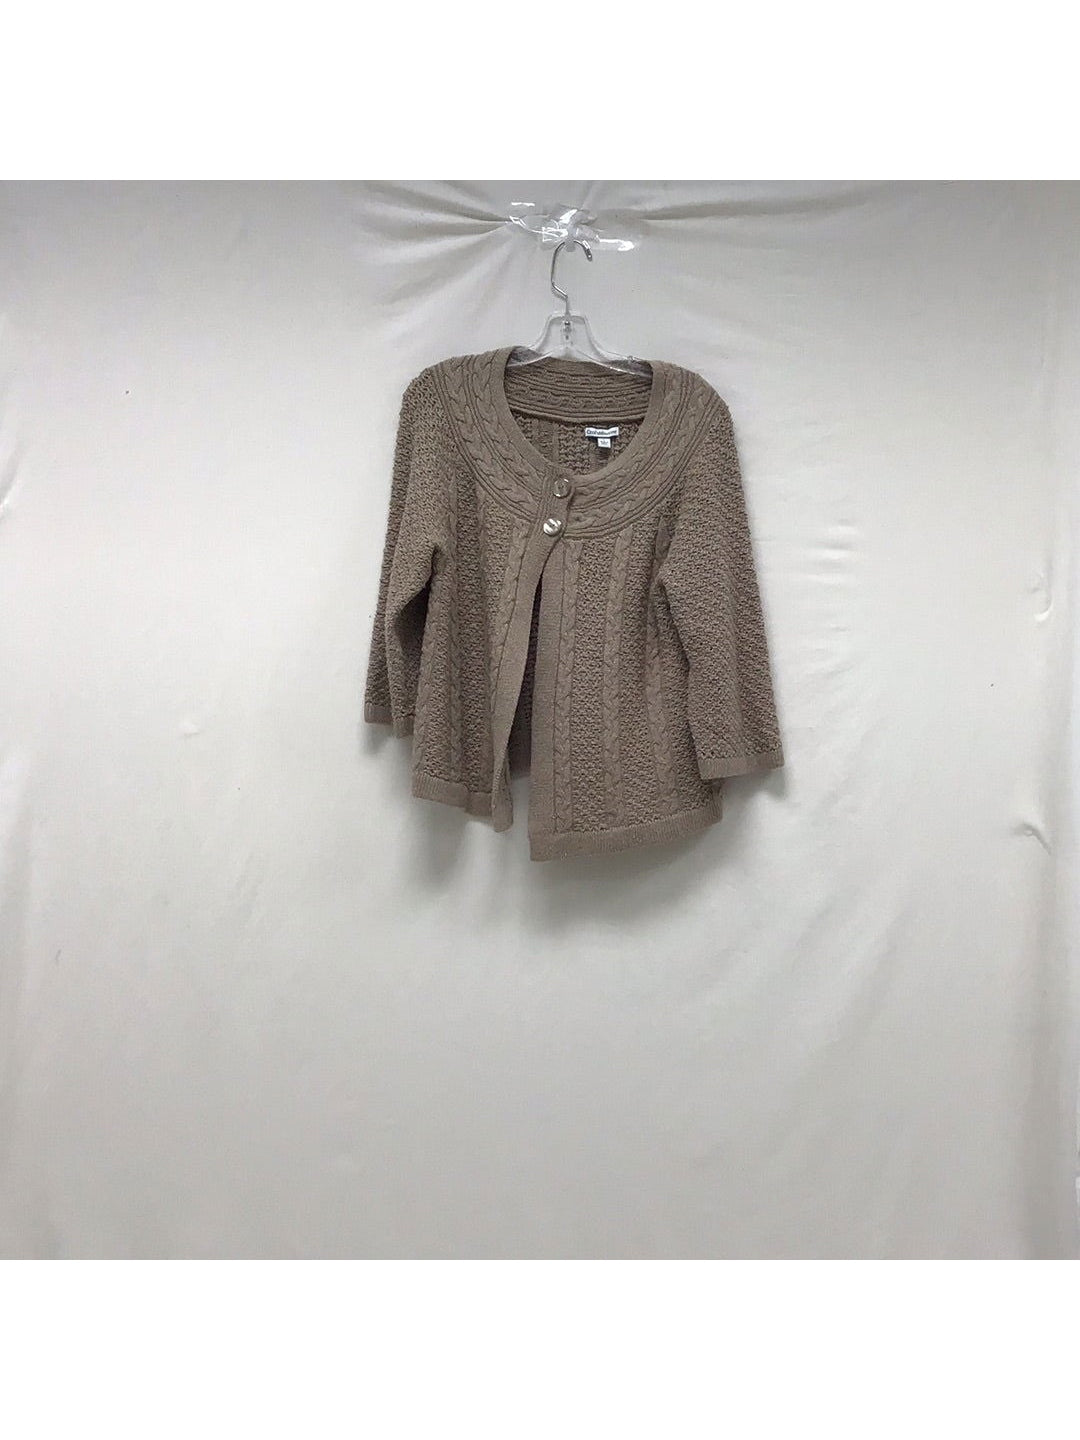 Croft & Barrow Ladies Light Brown Large Pullover - The Kennedy Collective Thrift - 